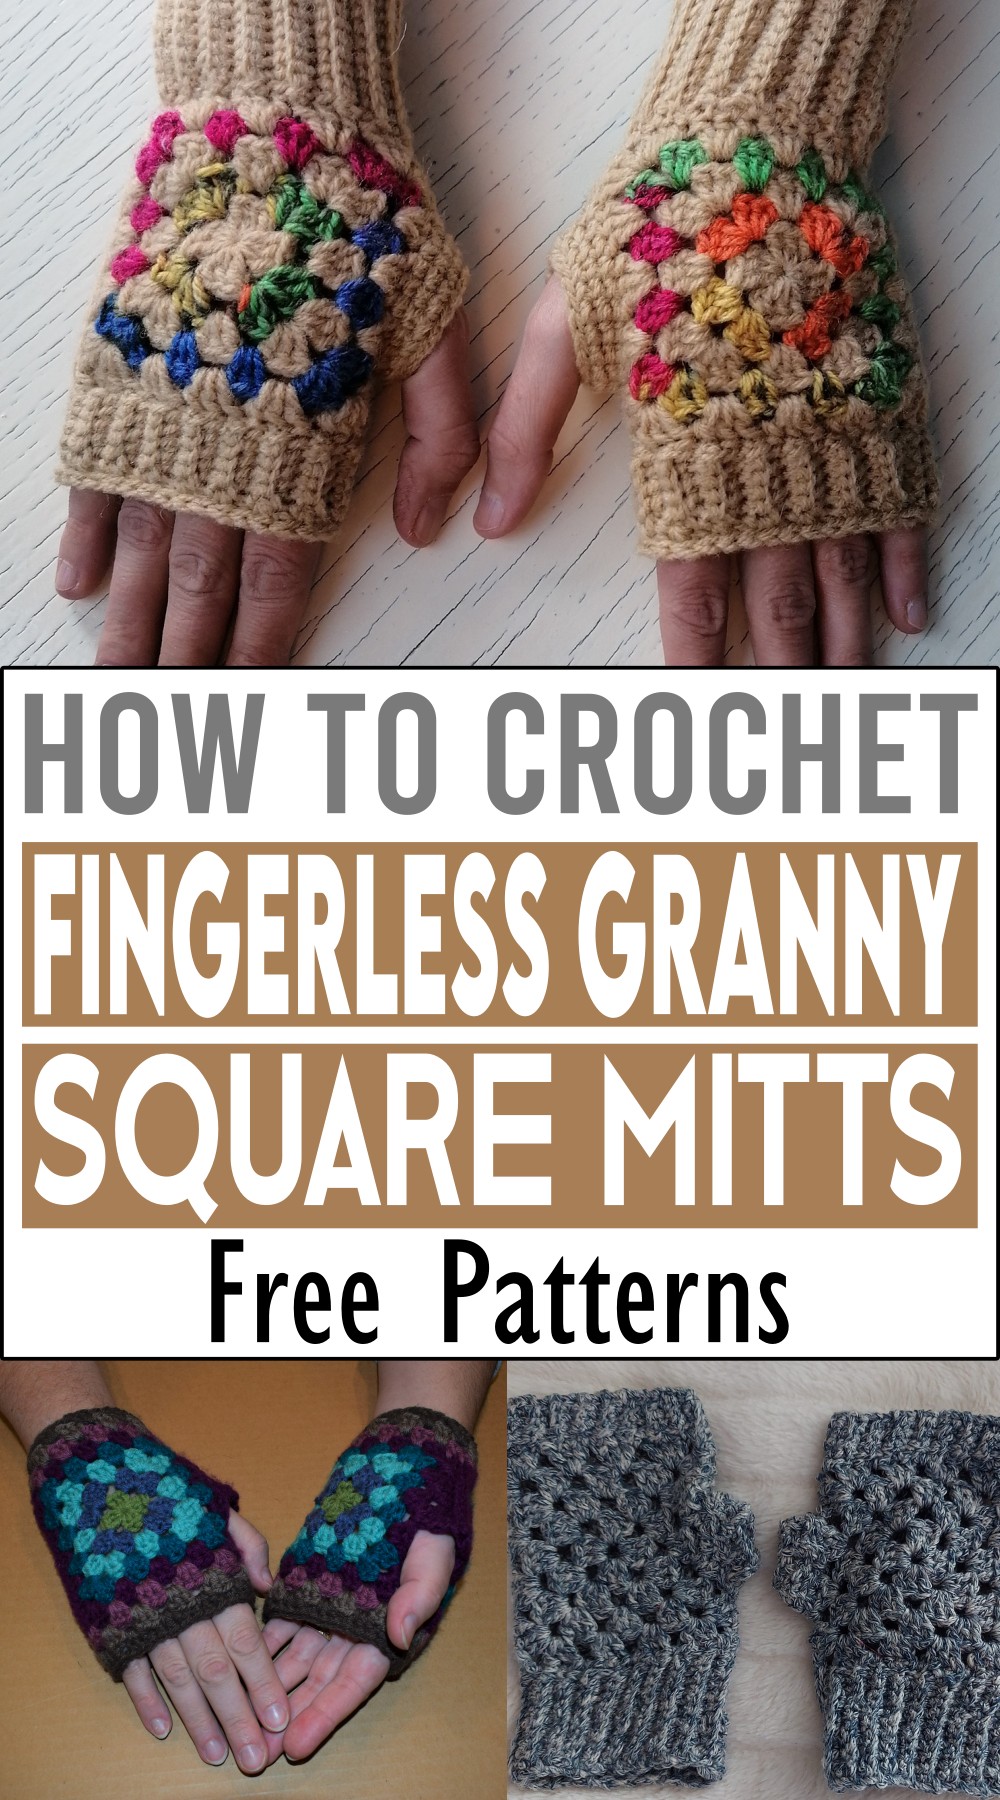 How to Crochet Fingerless Granny Square Mitts